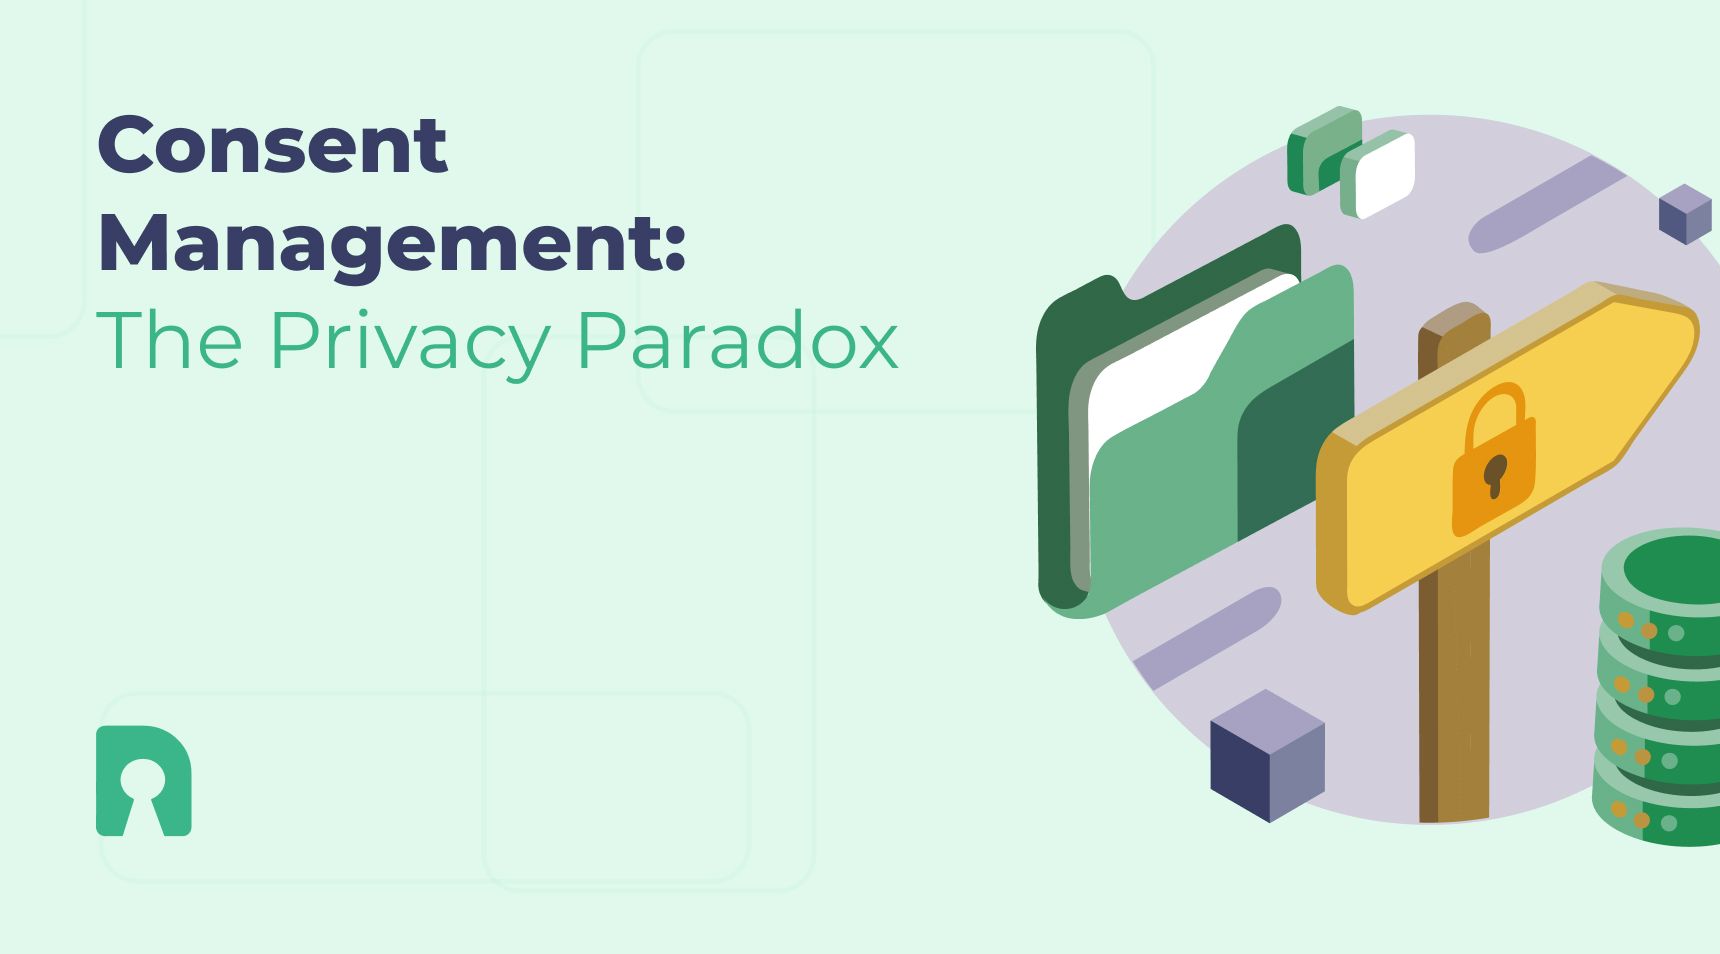 Consent Management: The Privacy Paradox